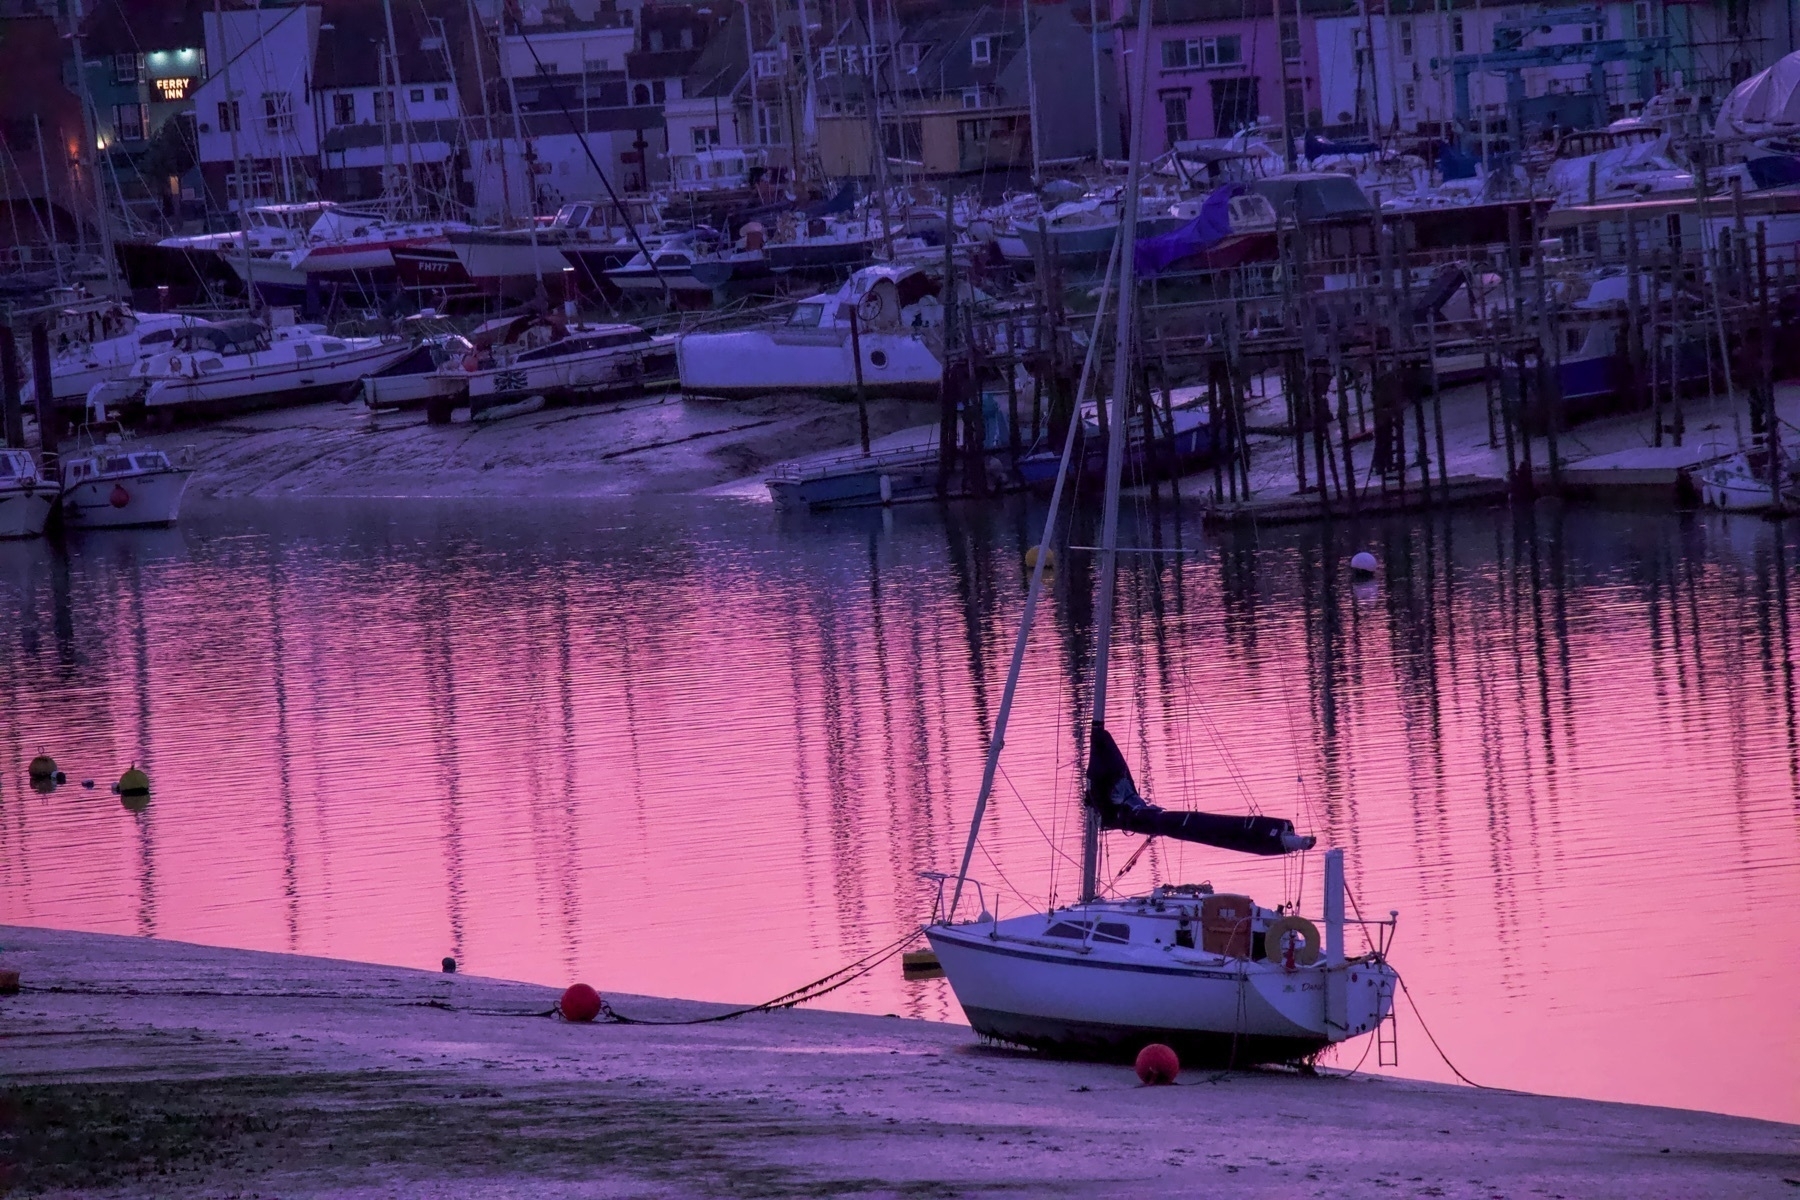 Sunset on the Adur in Shoreham-by-Sea, highlighting boats on the river. 